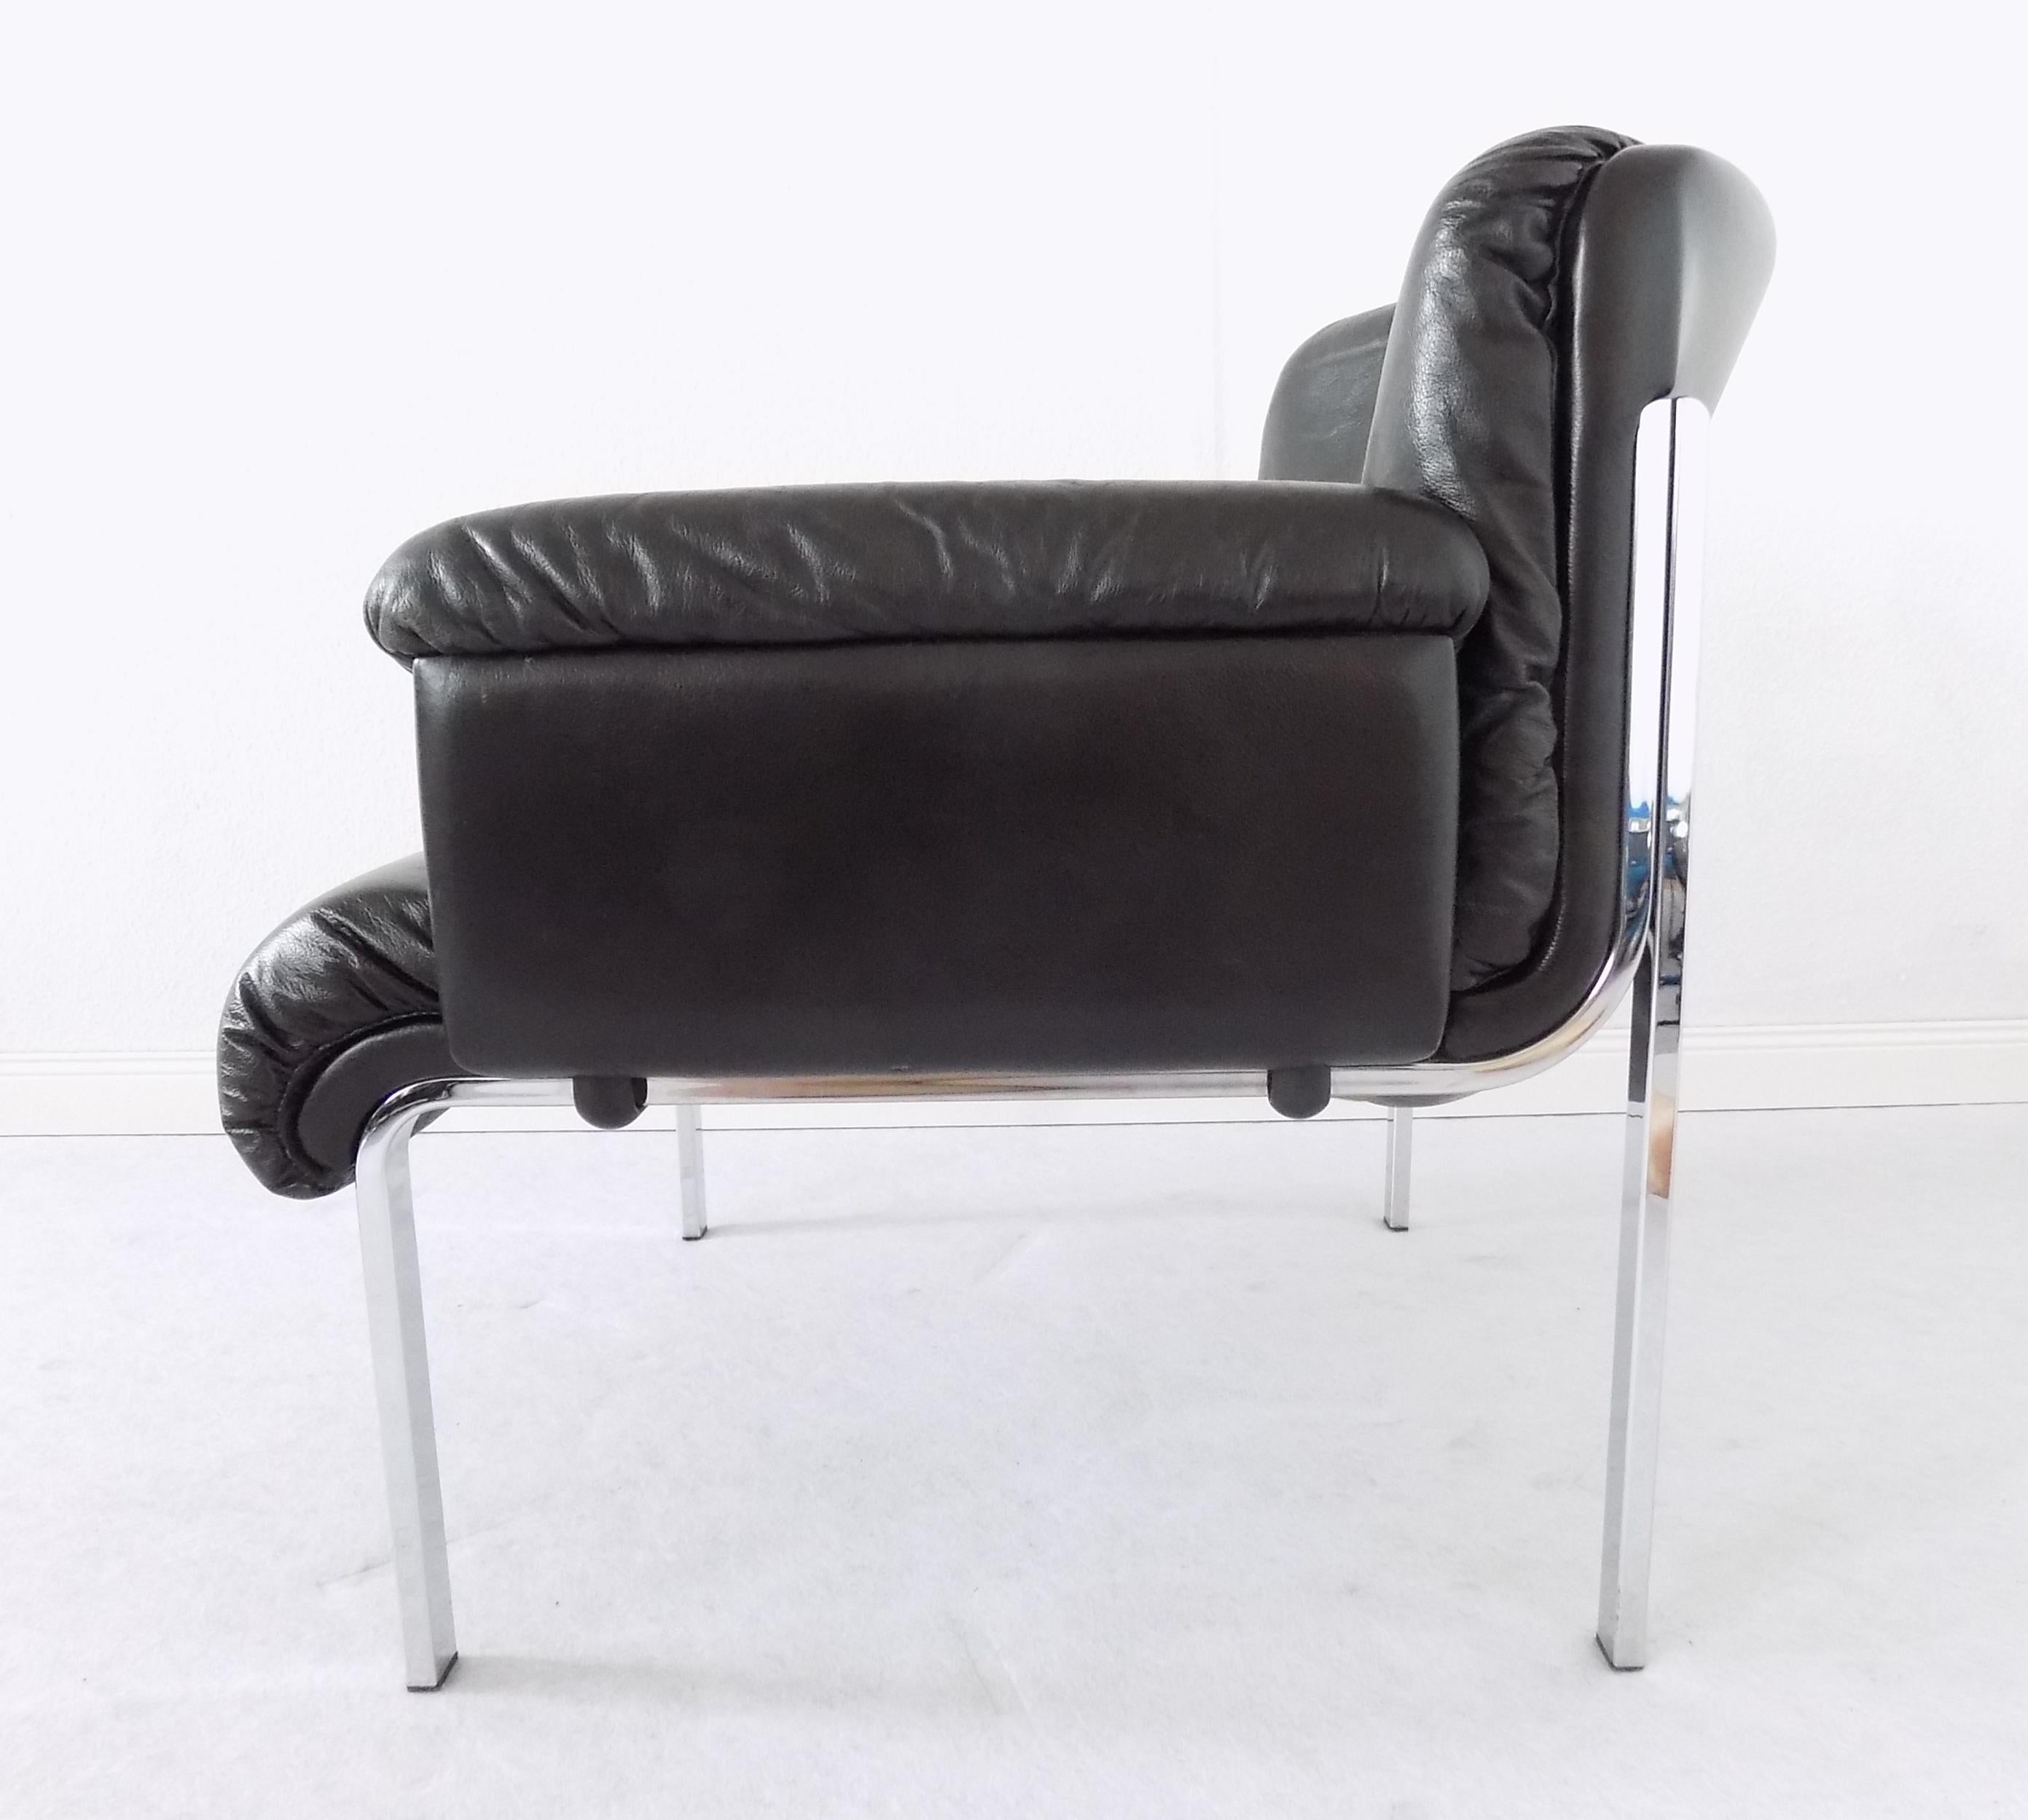 Girsberger Eurochair Black Leather Lounge Chair, Swiss made, Mid-Century modern In Good Condition For Sale In Ludwigslust, Mecklenburg-Vorpommern